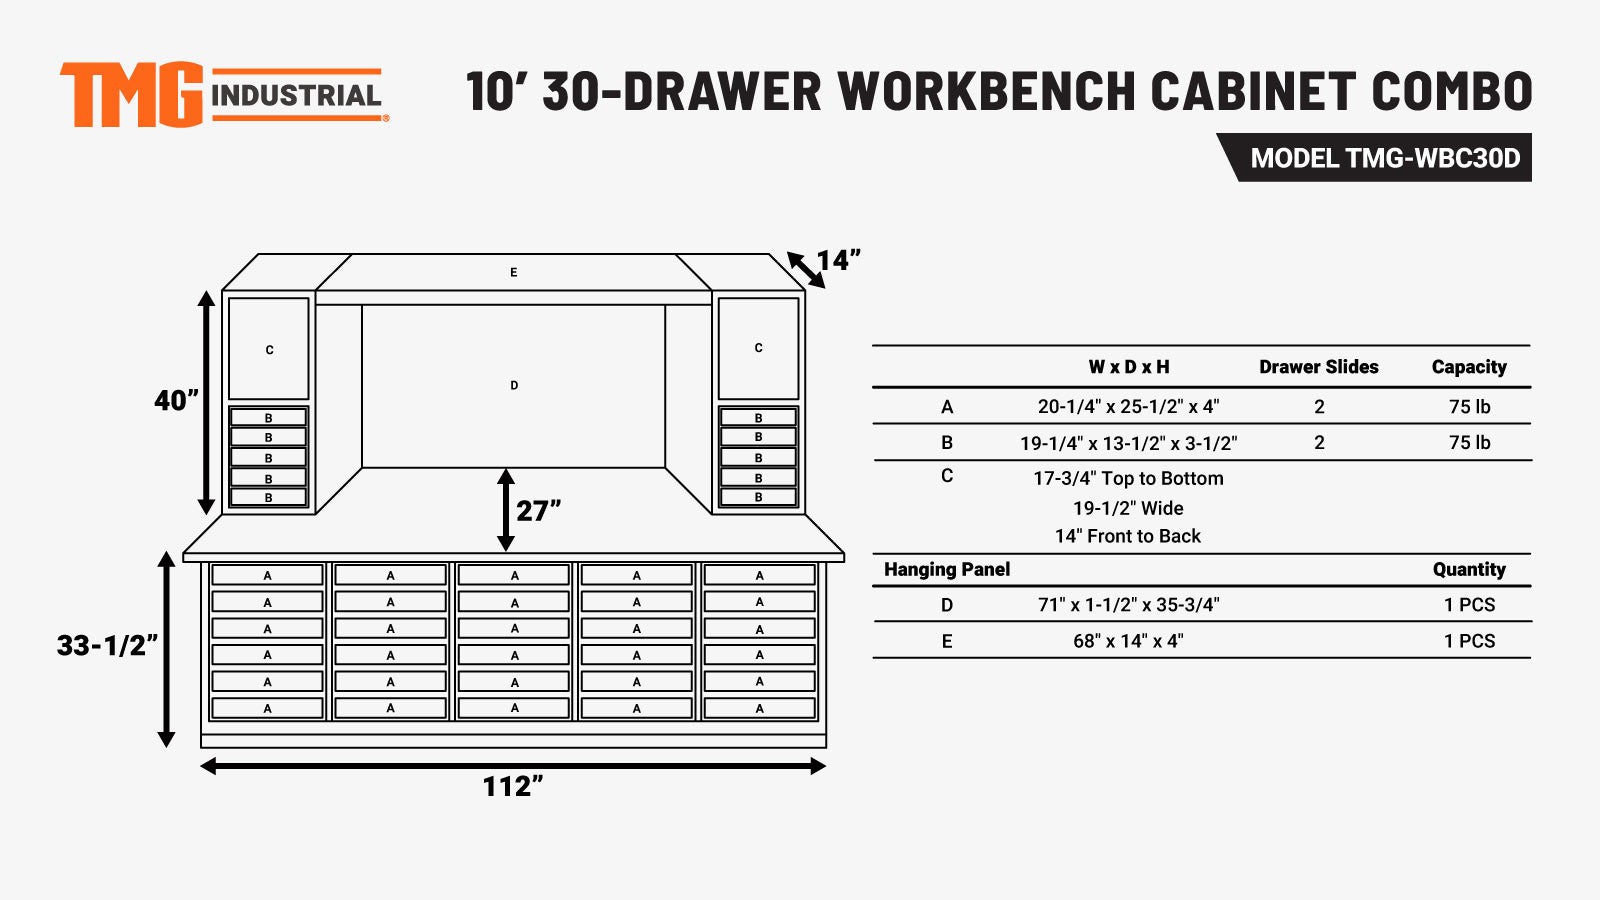 TMG-WBC30D 10' 30-Drawer Workbench Cabinet Combo with 68